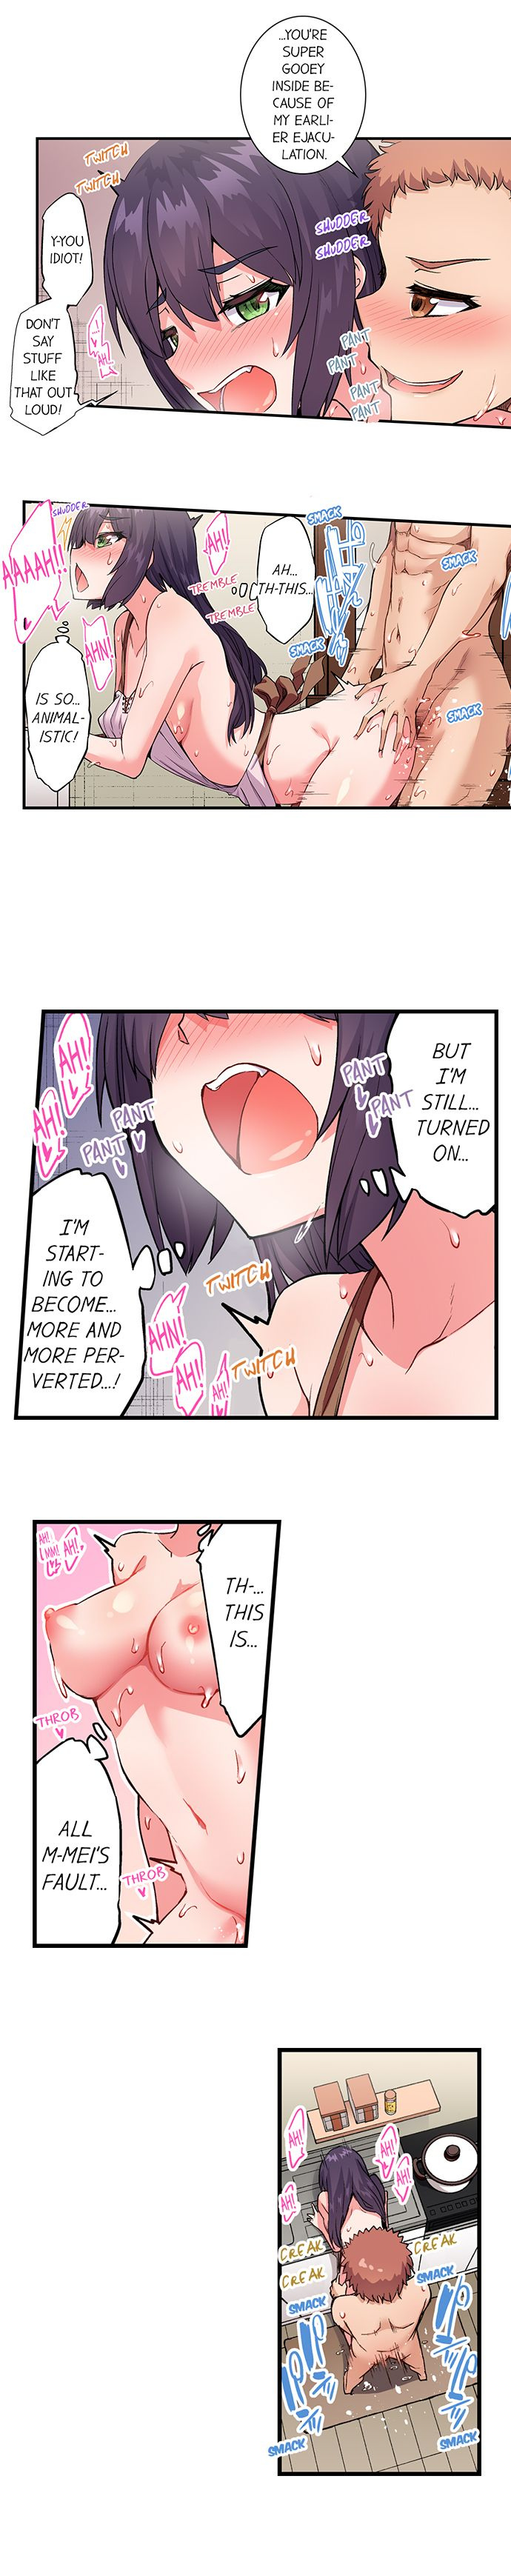 Traditional Job of Washing Girls’ Body - Chapter 166 Page 5